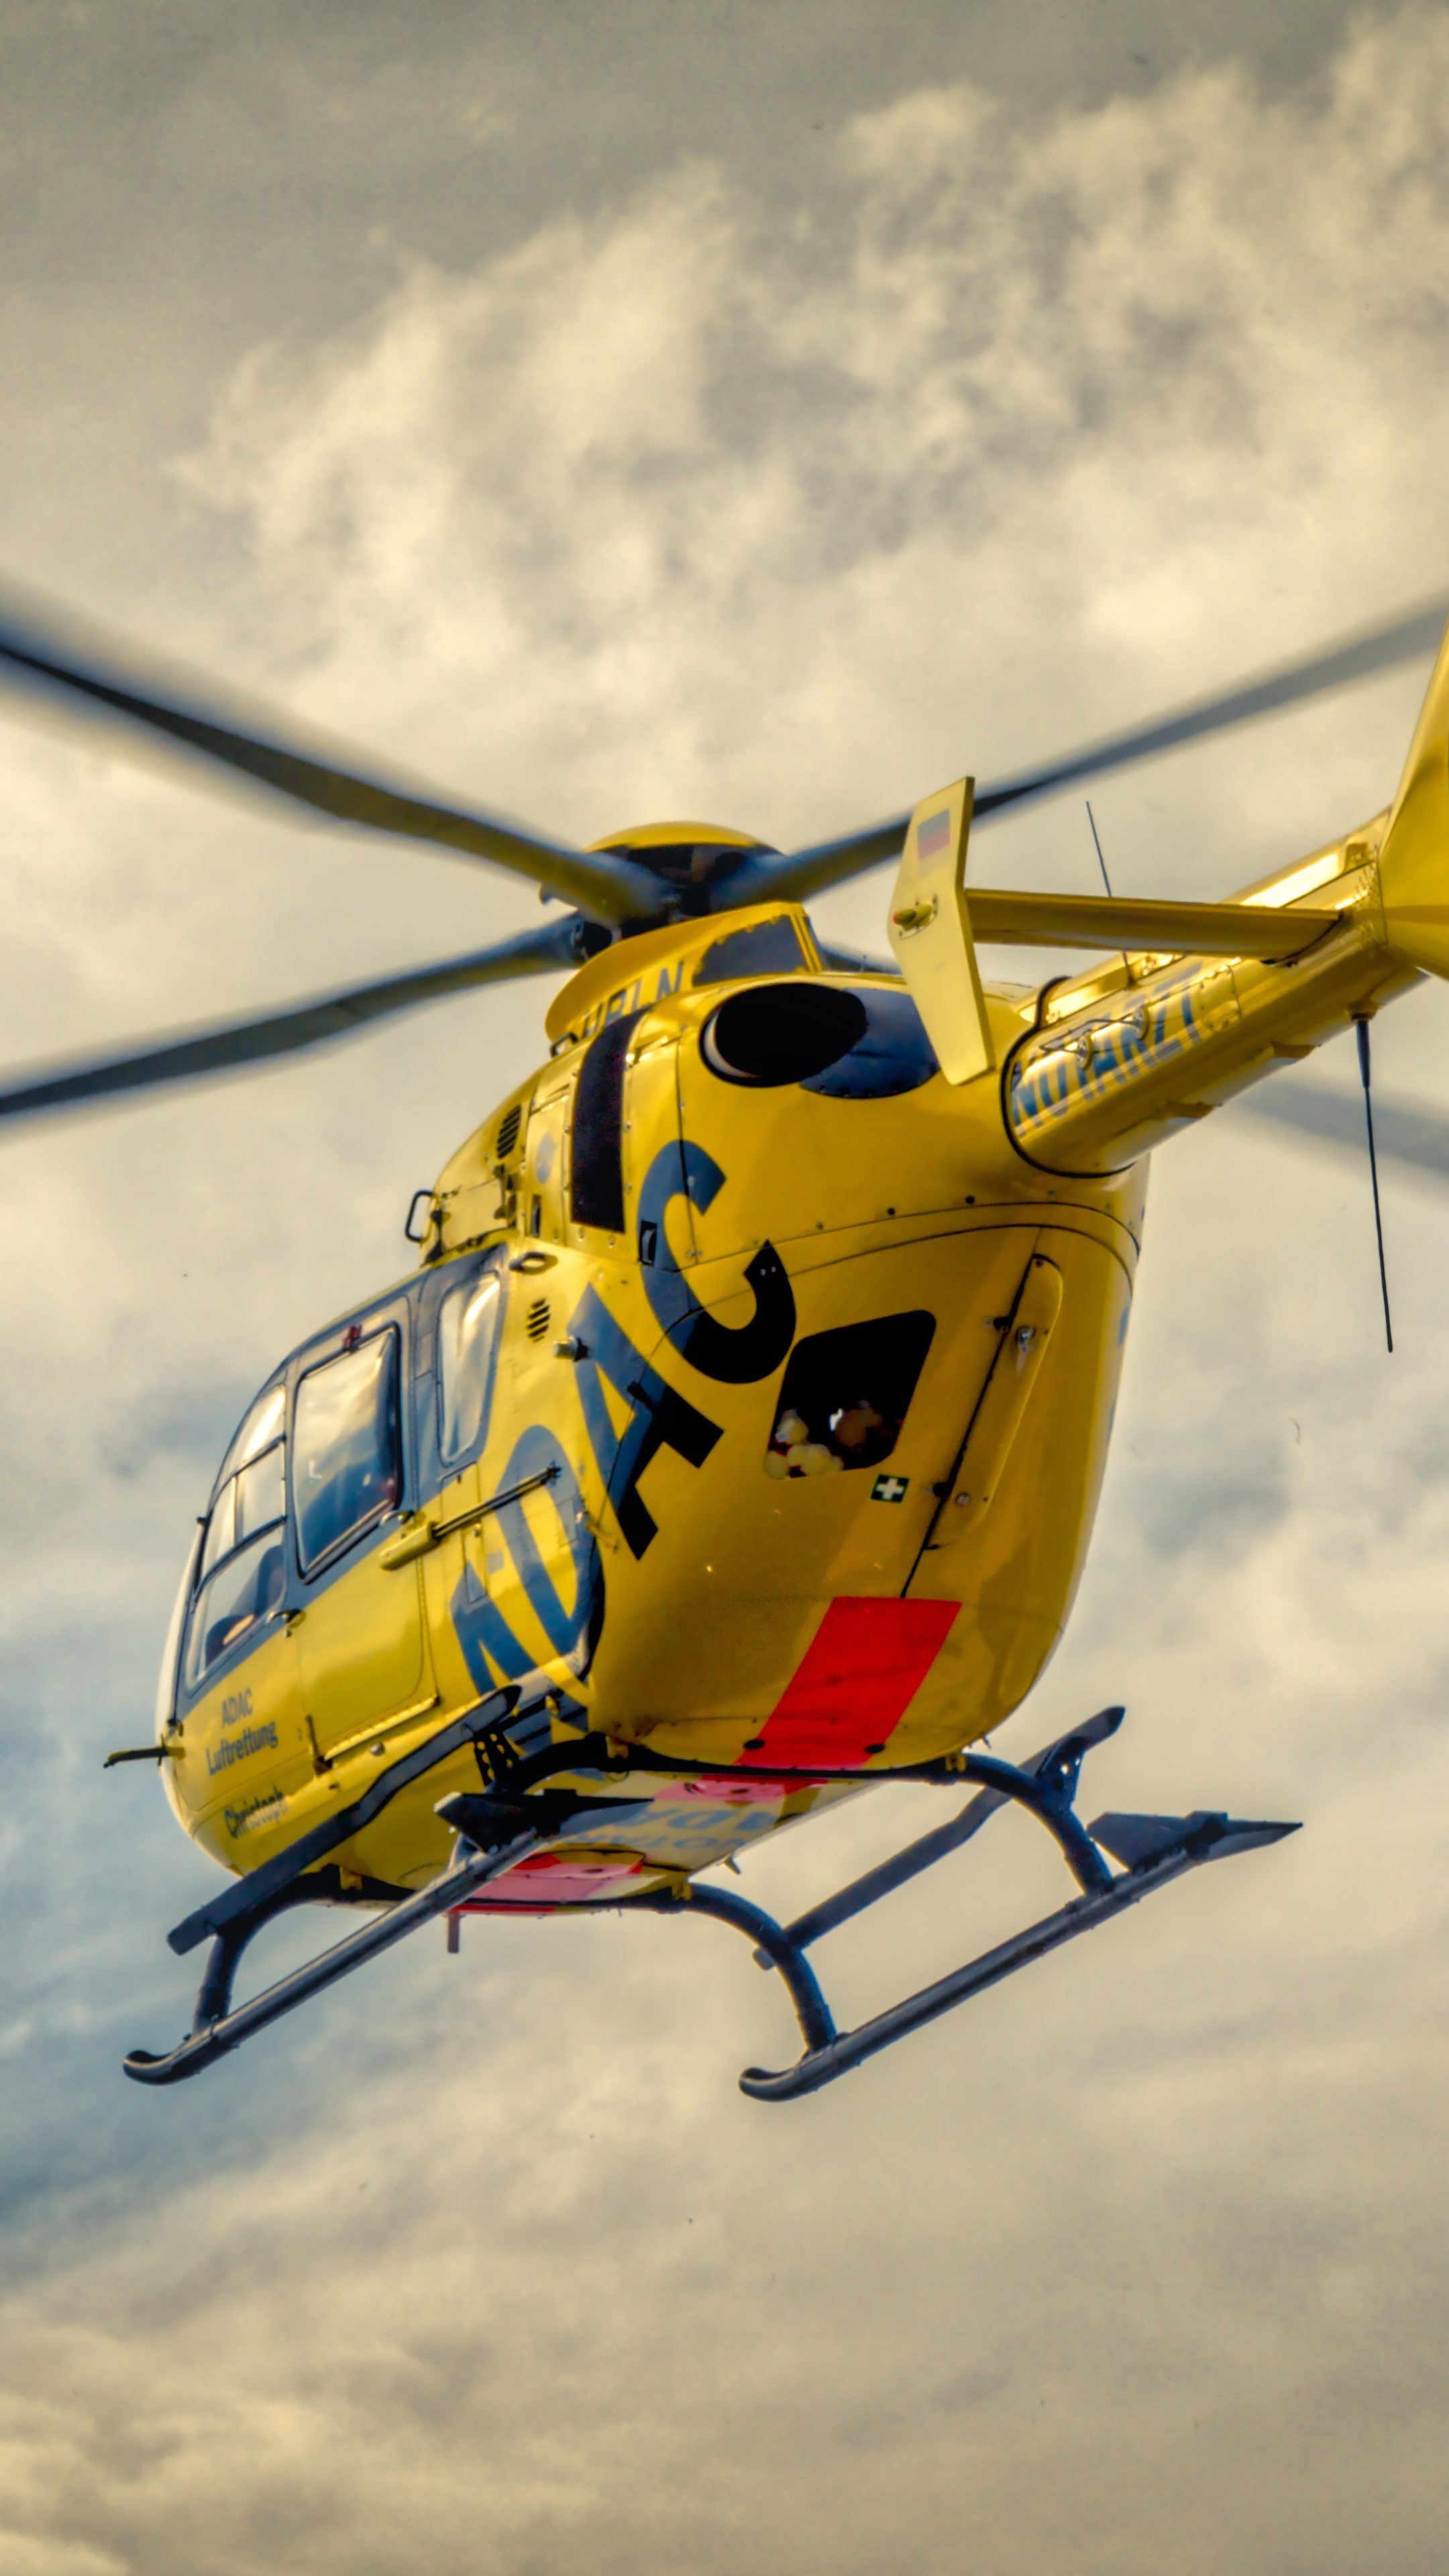 ADAC Rescue Helicopter 6K UHD Wallpaper